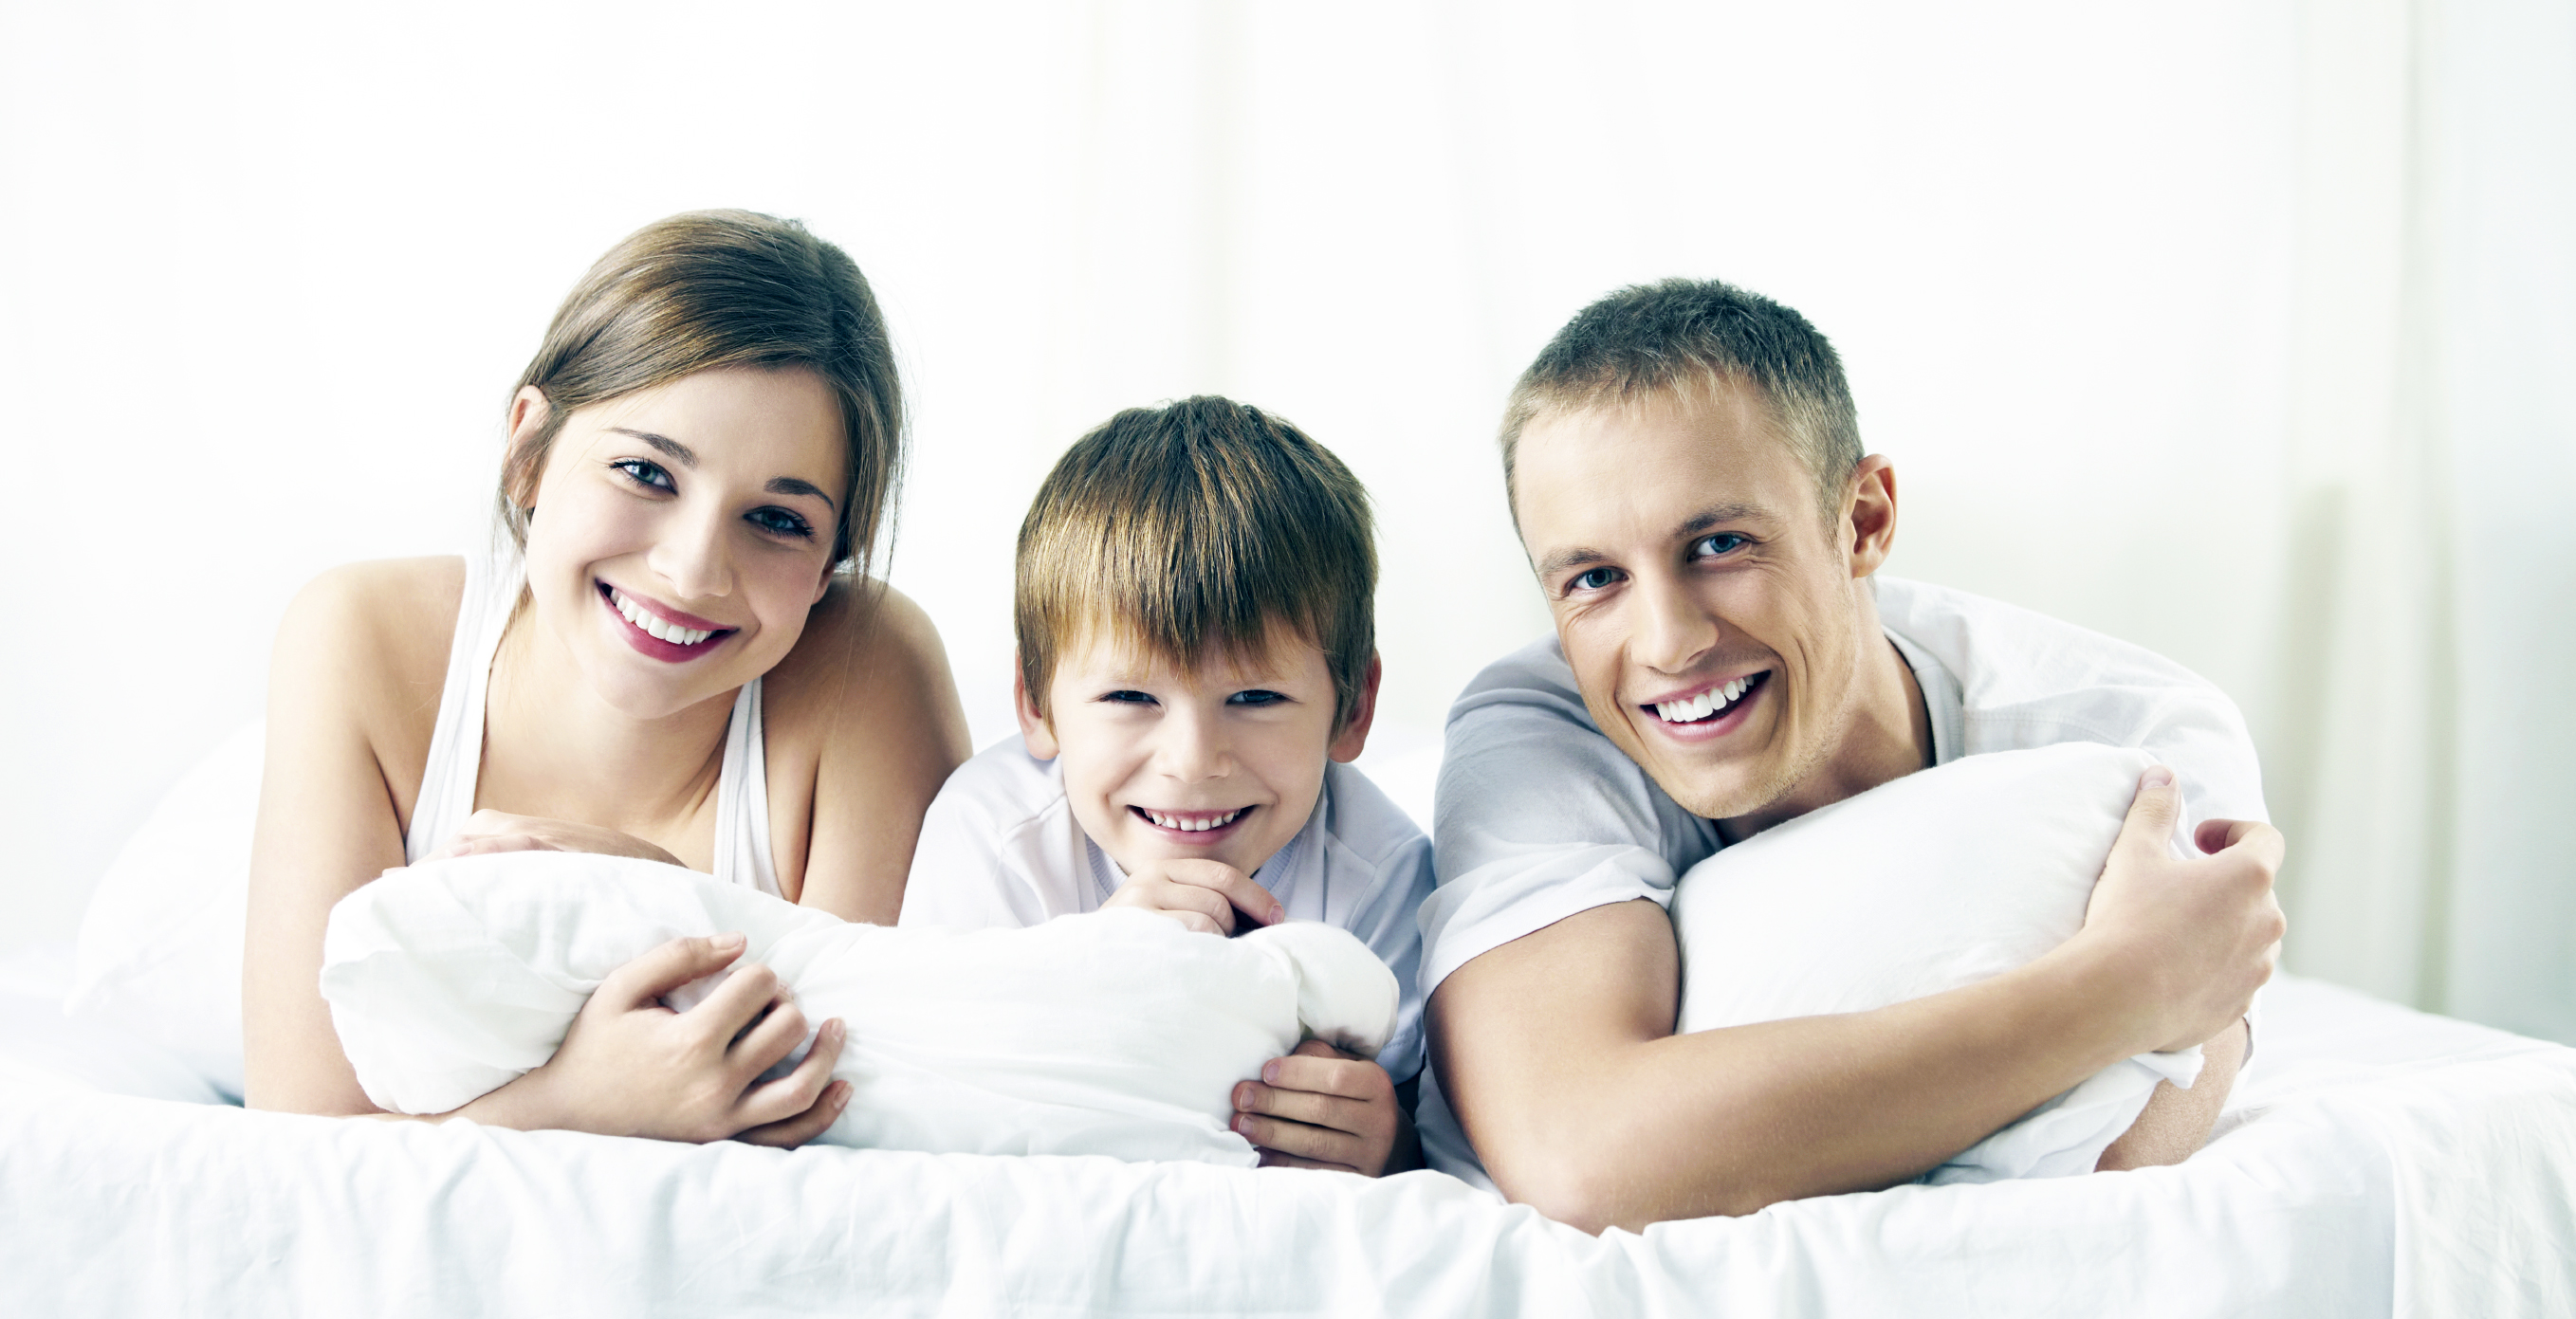 Smiling family in a bedroom at home